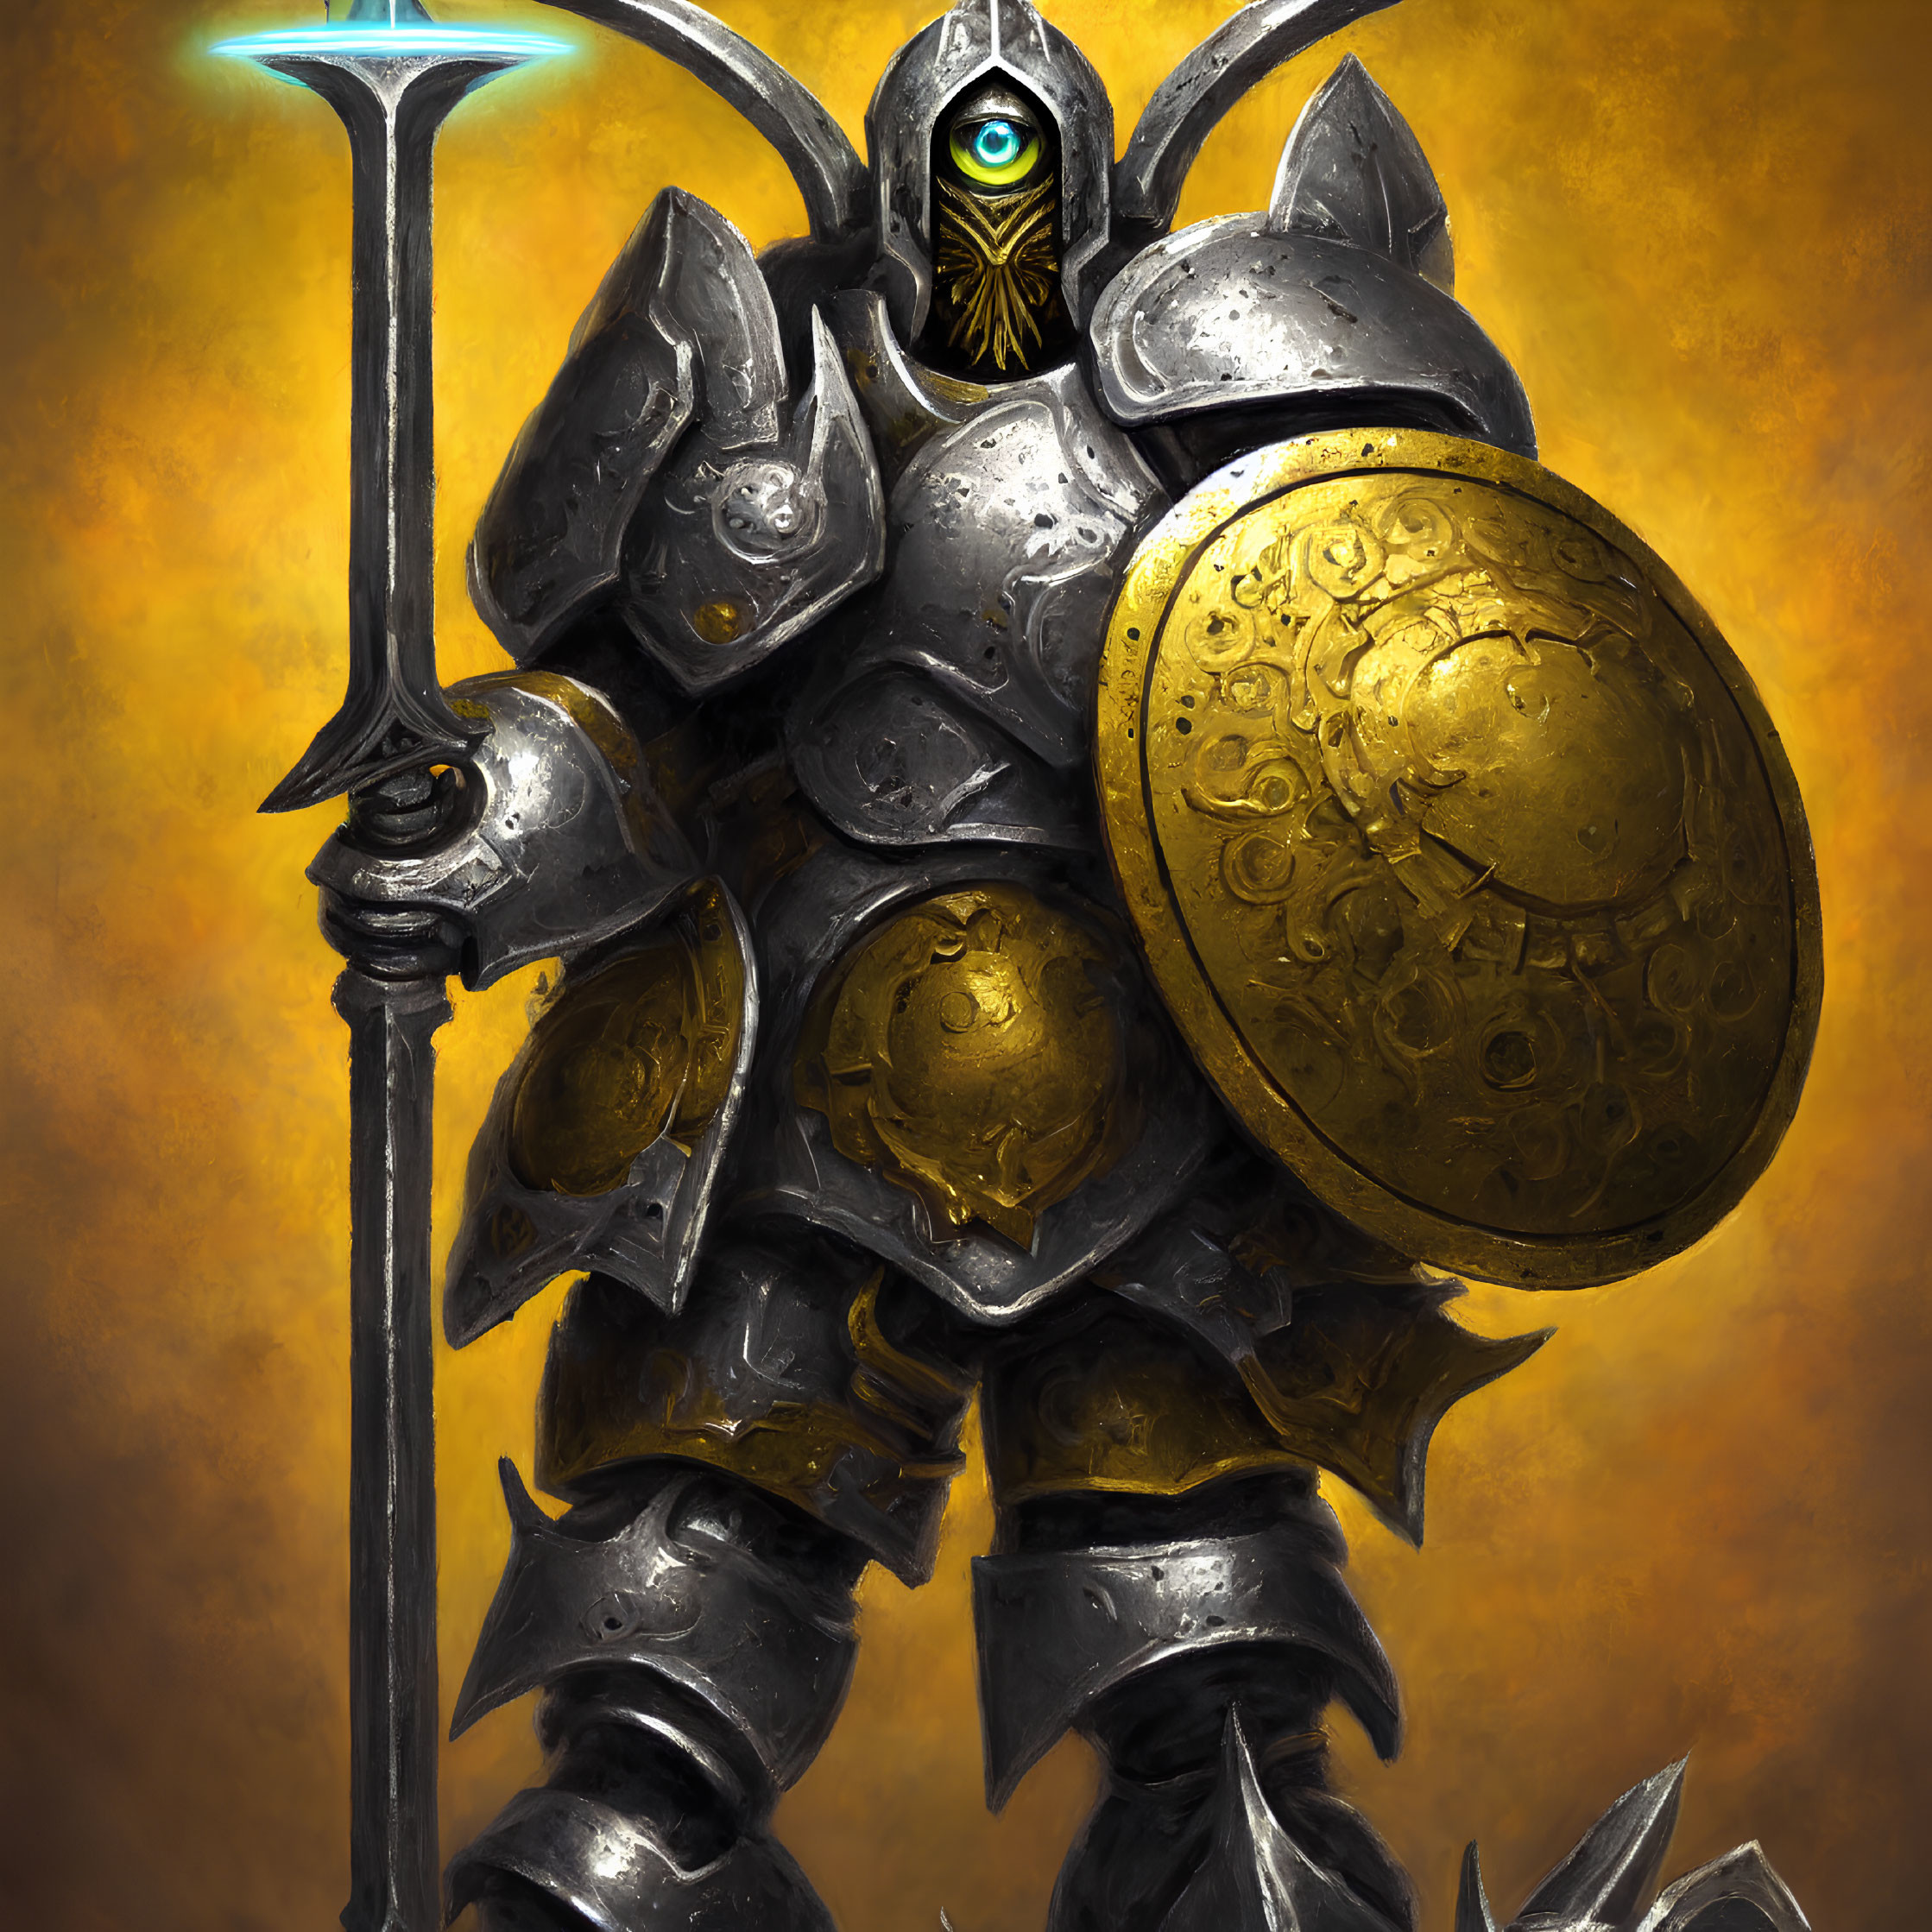 Armored knight with glowing blue eye, halberd, shield on golden backdrop